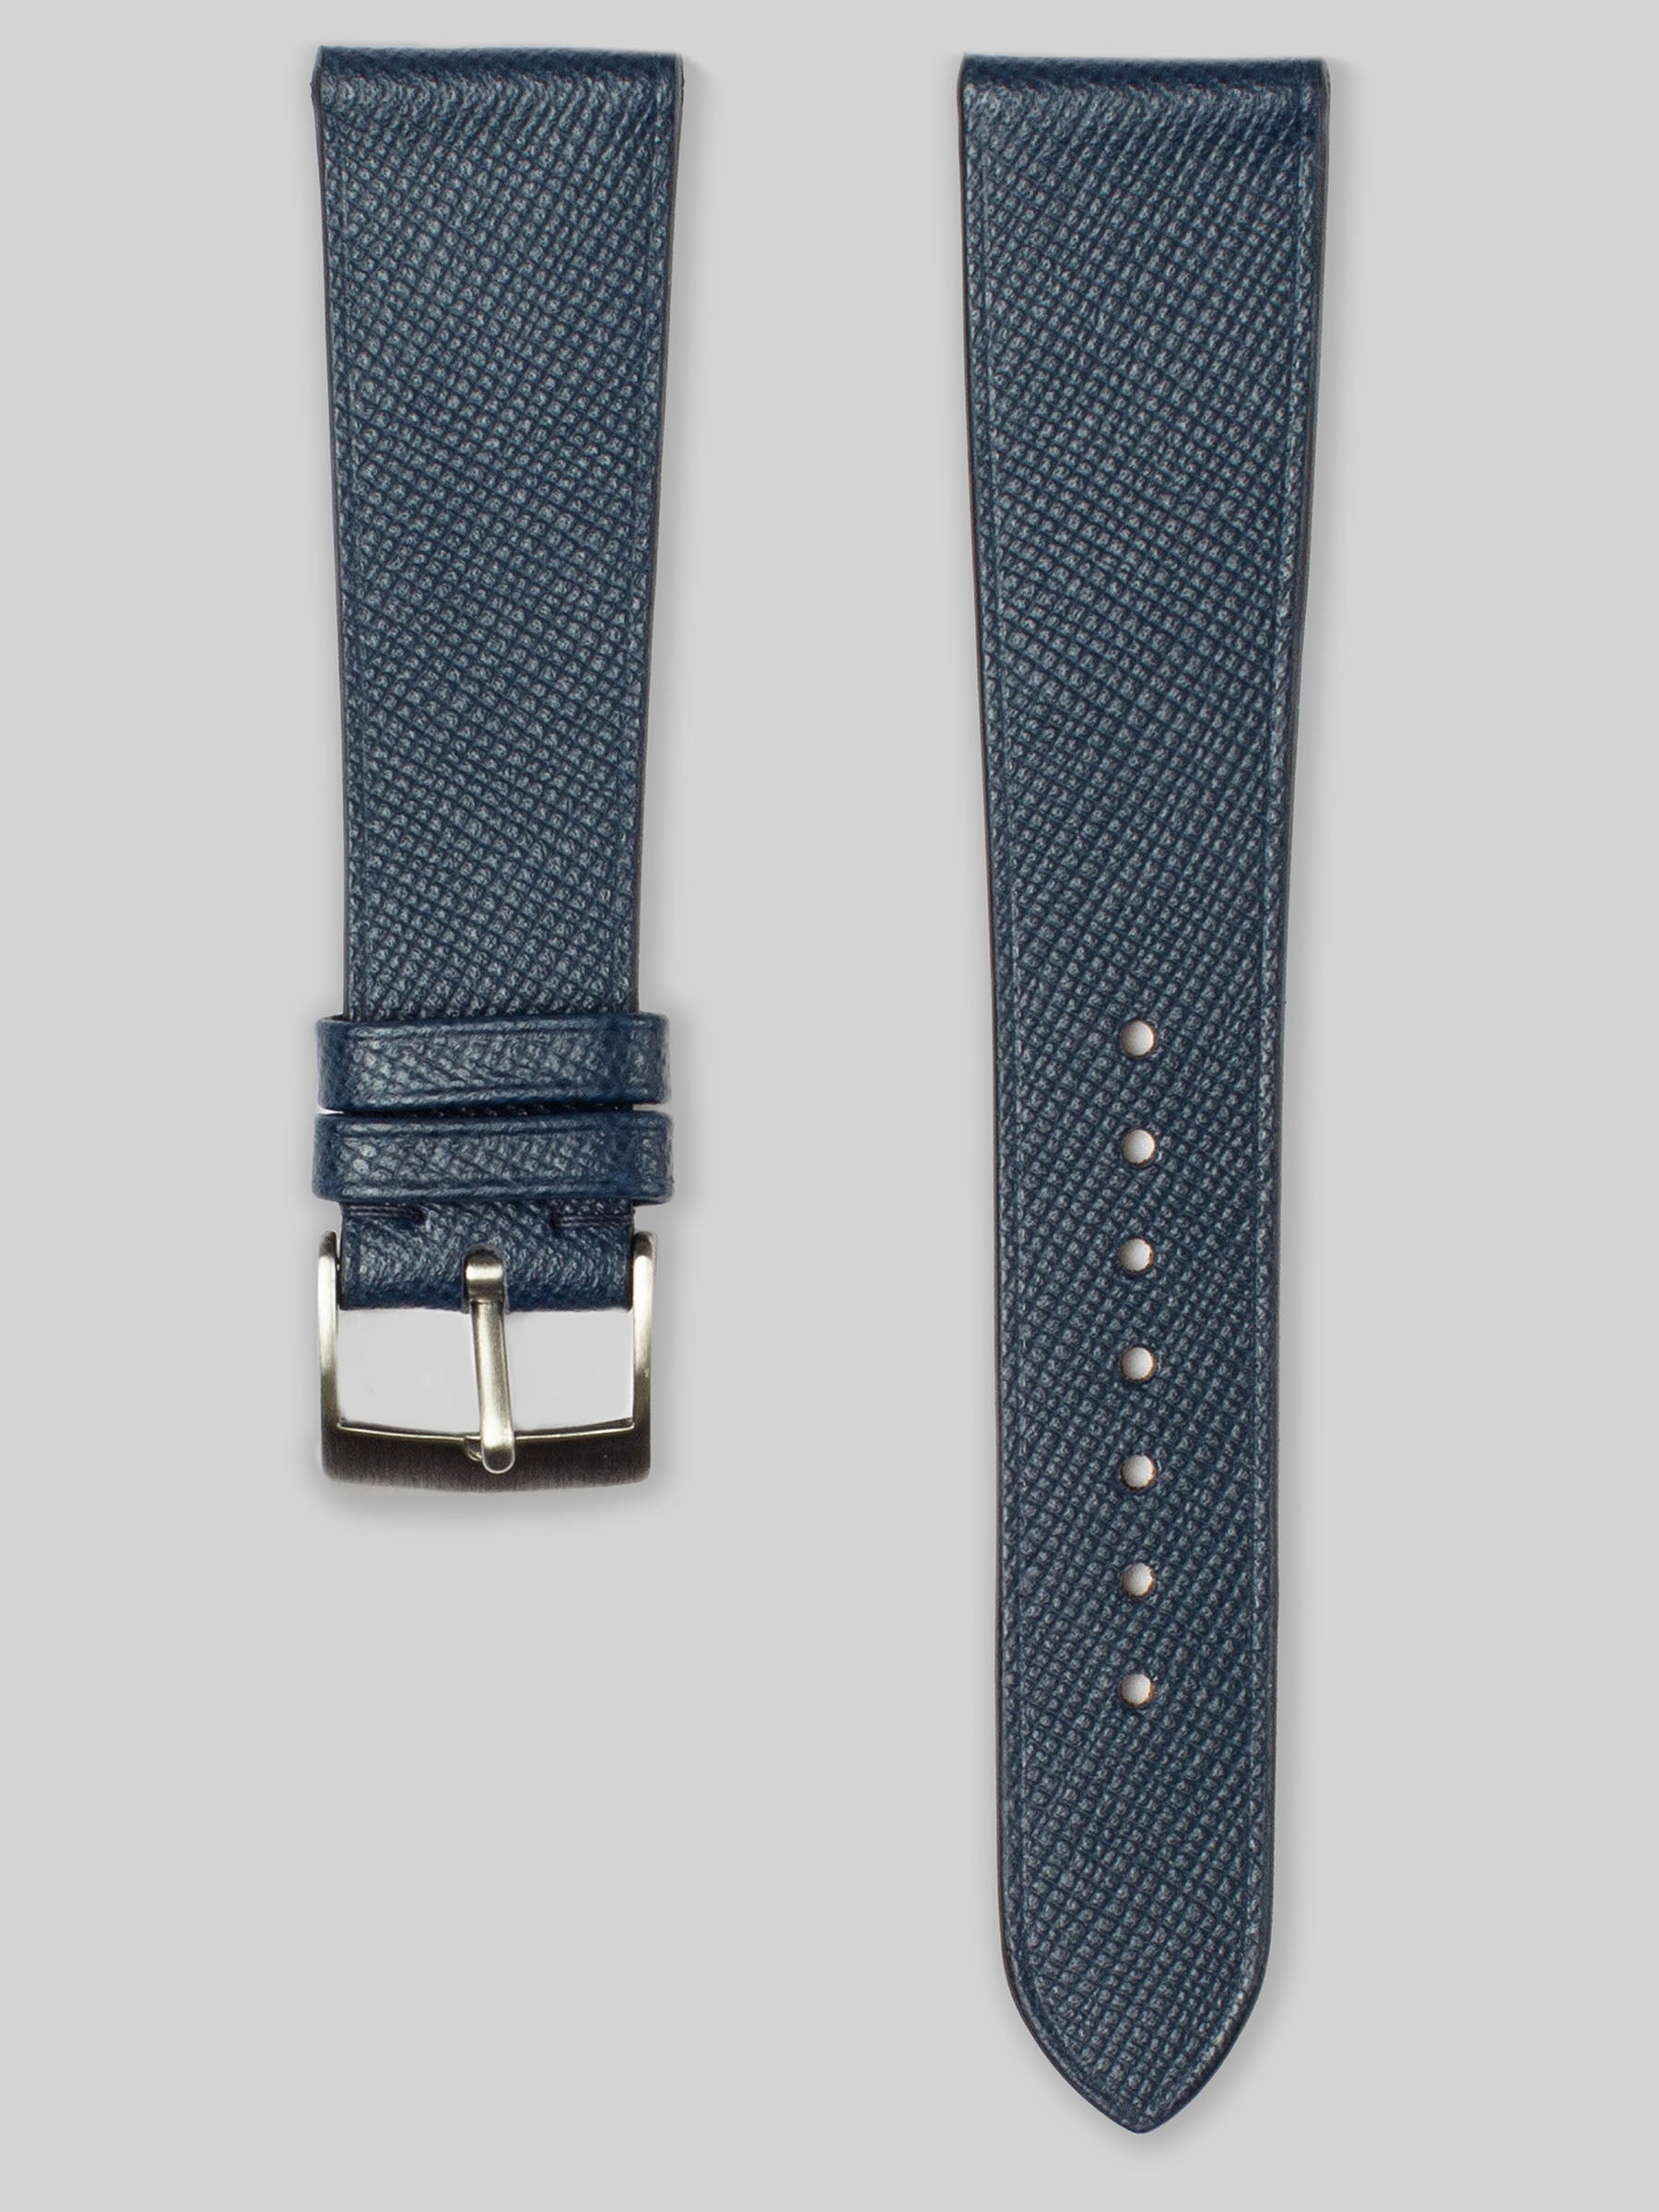 Saffiano Leather Watch Strap - Navy Blue